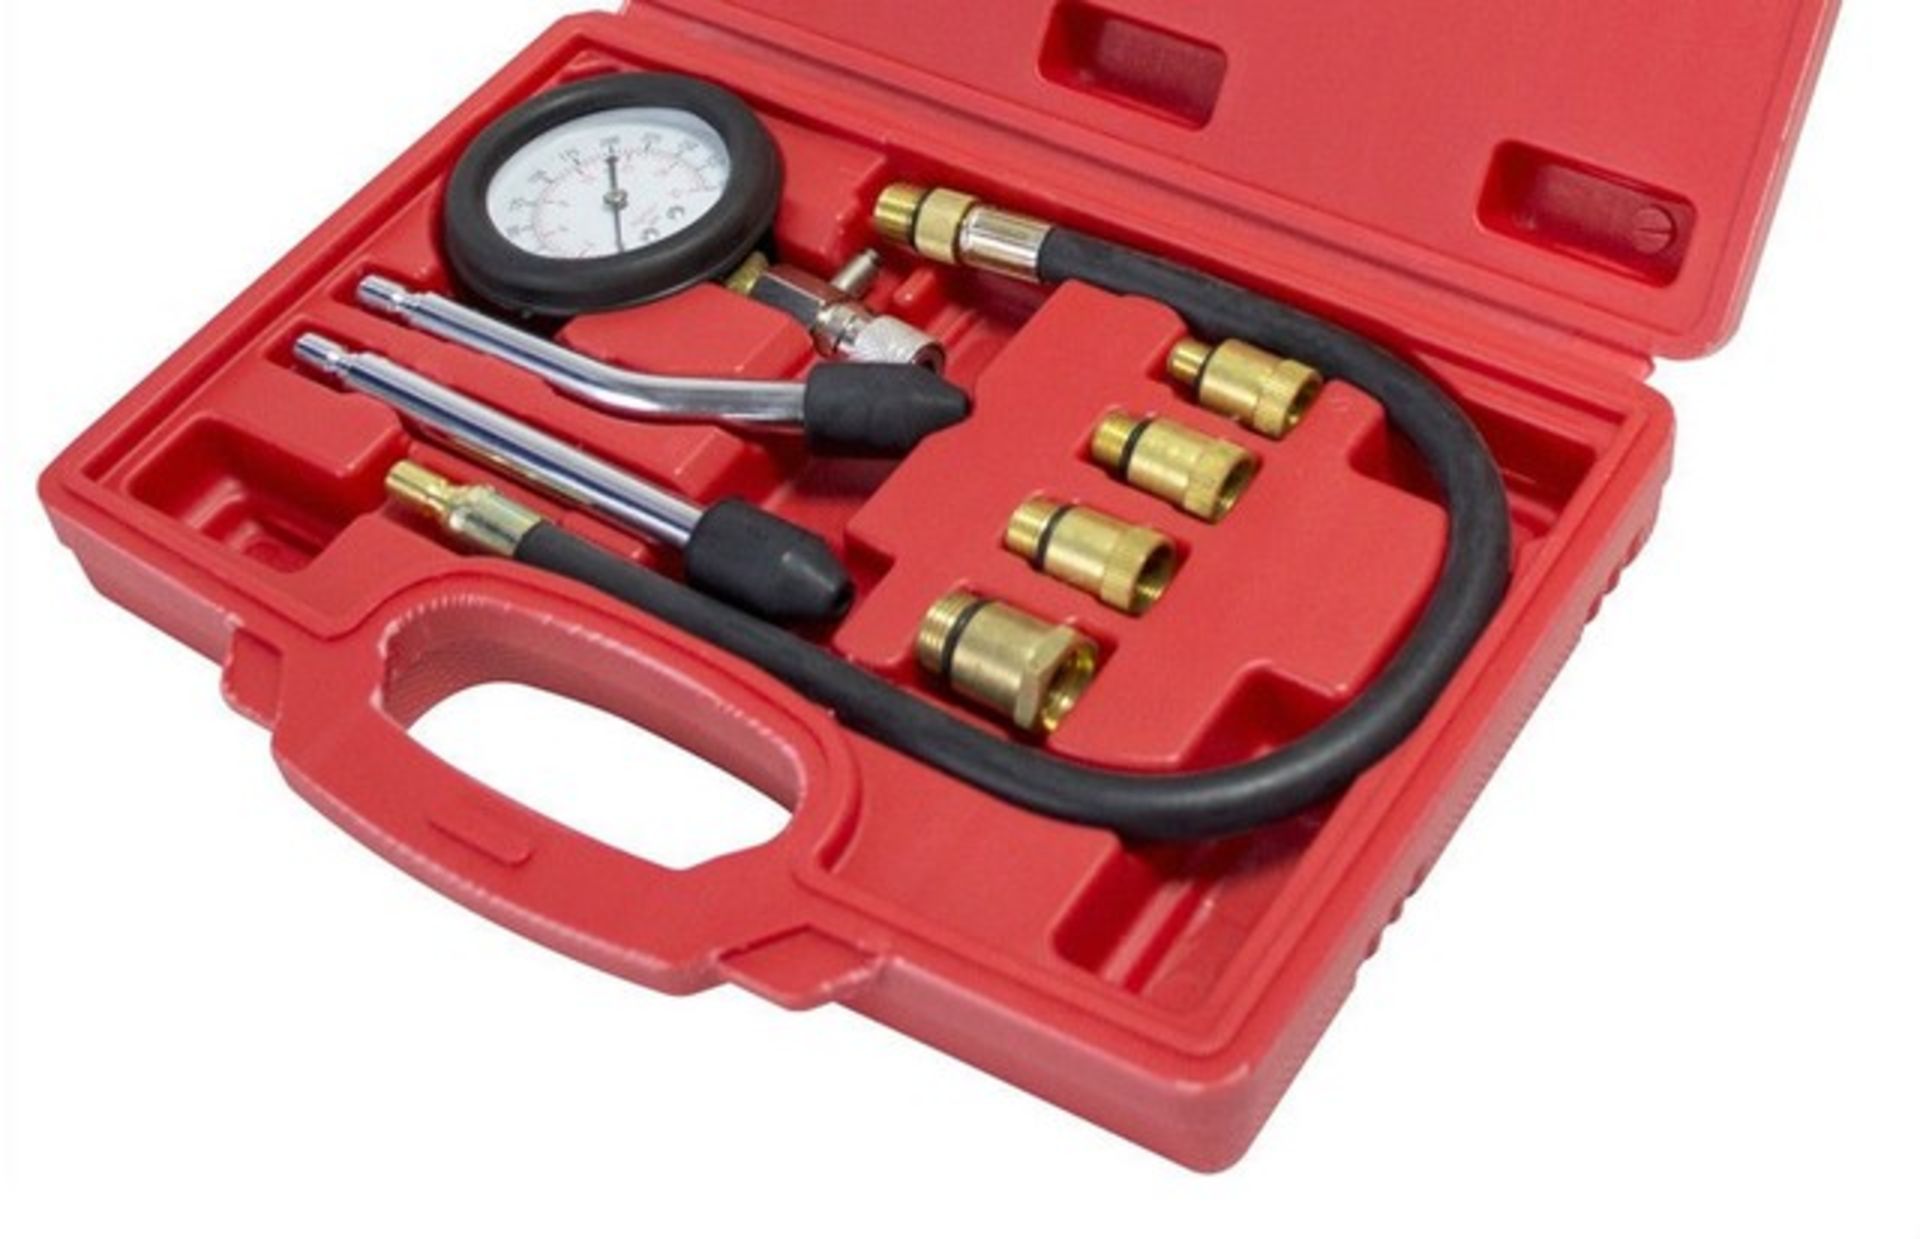 V Brand New Automotive Compression Tester Kit - Suitable For Petrol And Diesel Engines - Corrosion